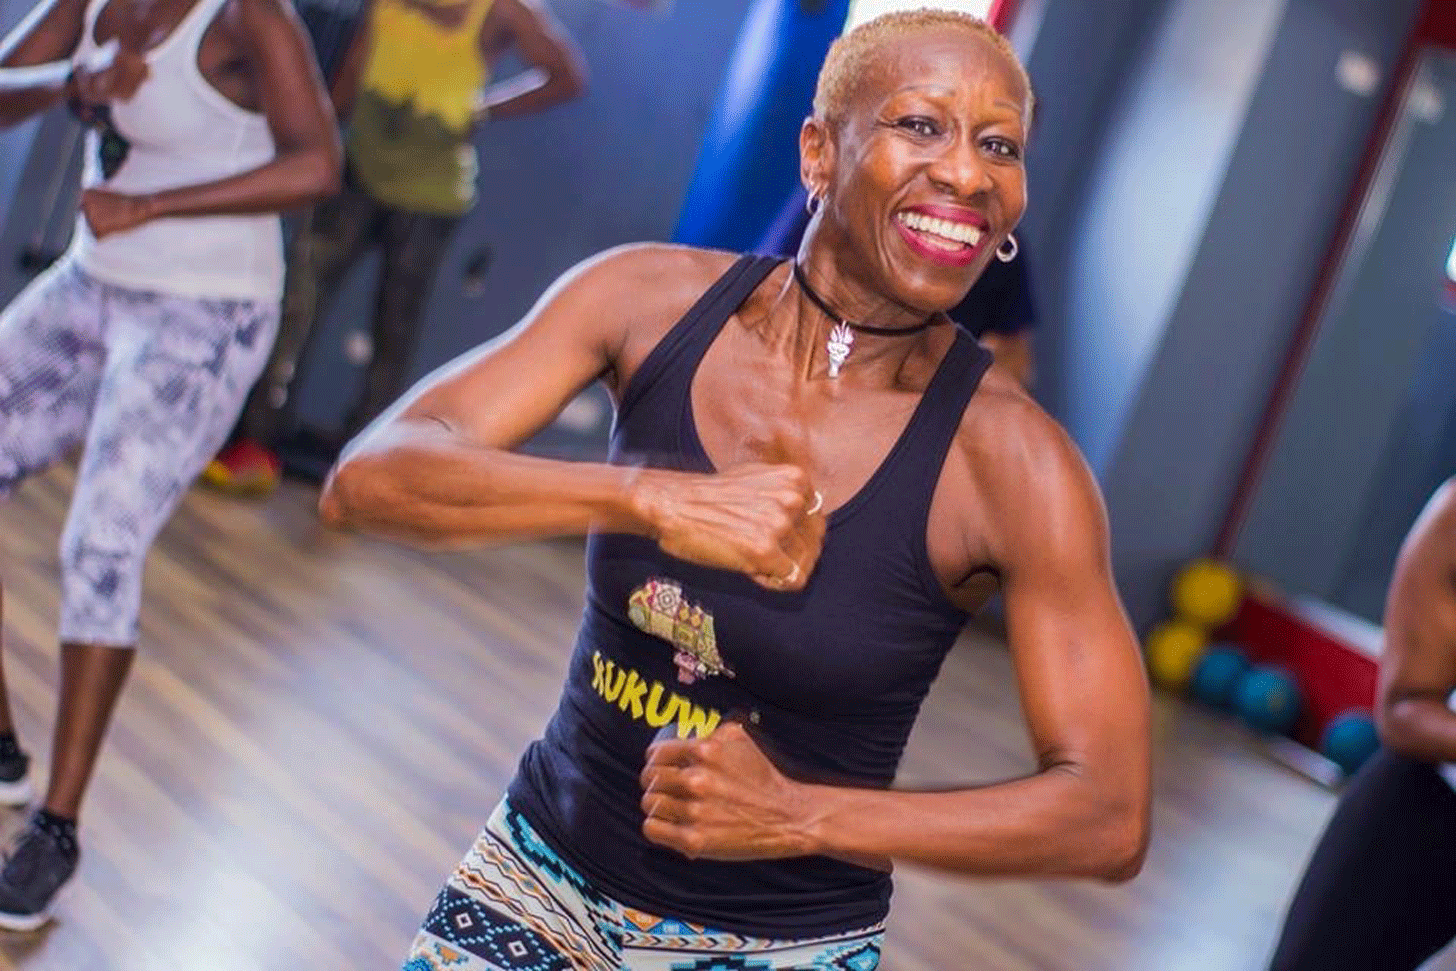 Move Your Boombsey! How Kukuwa Fitness Brought African Rhythms Into the Light